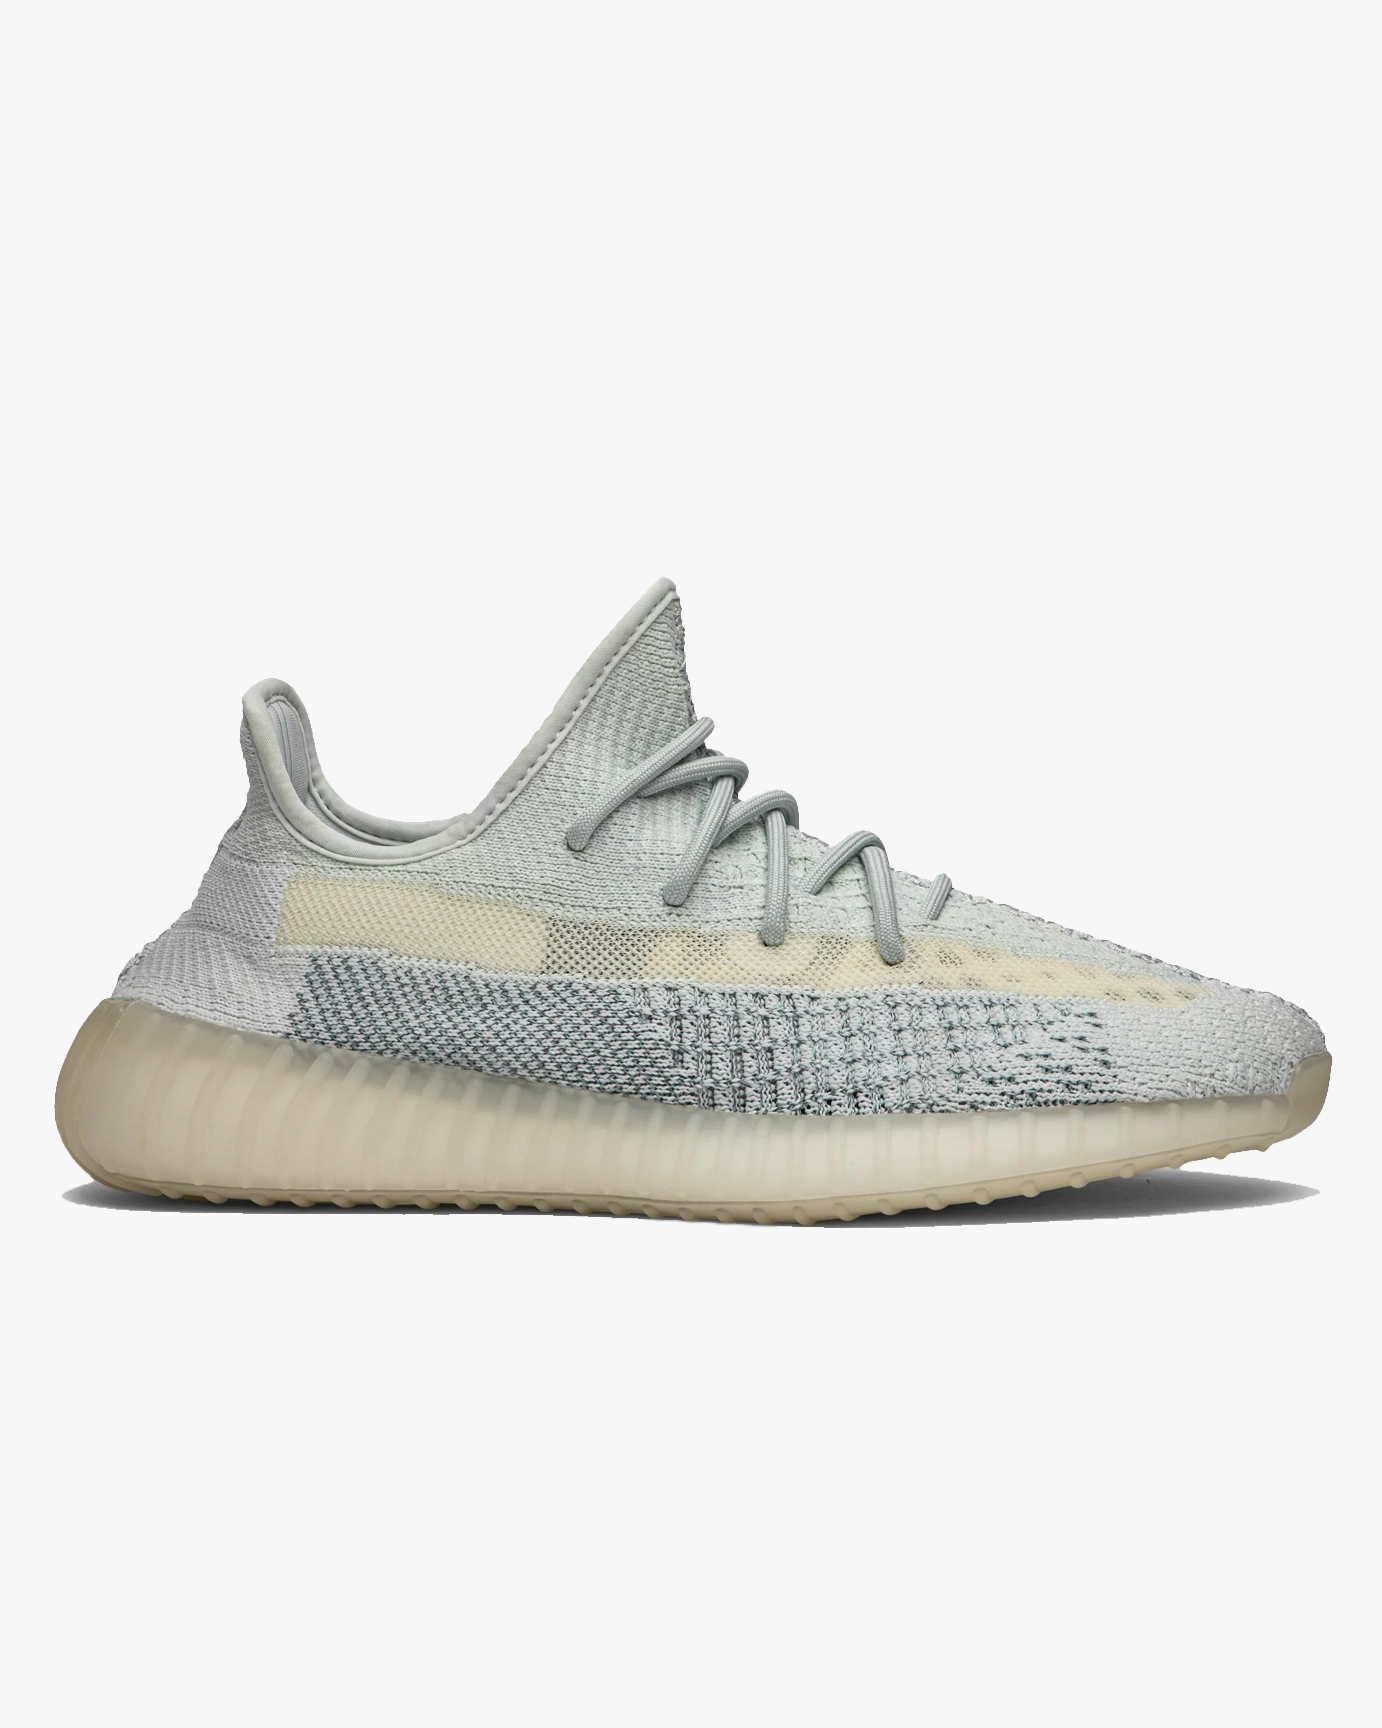 Yeezy Boost 350 V2 'Cloud White Reflective' | RARE LAB